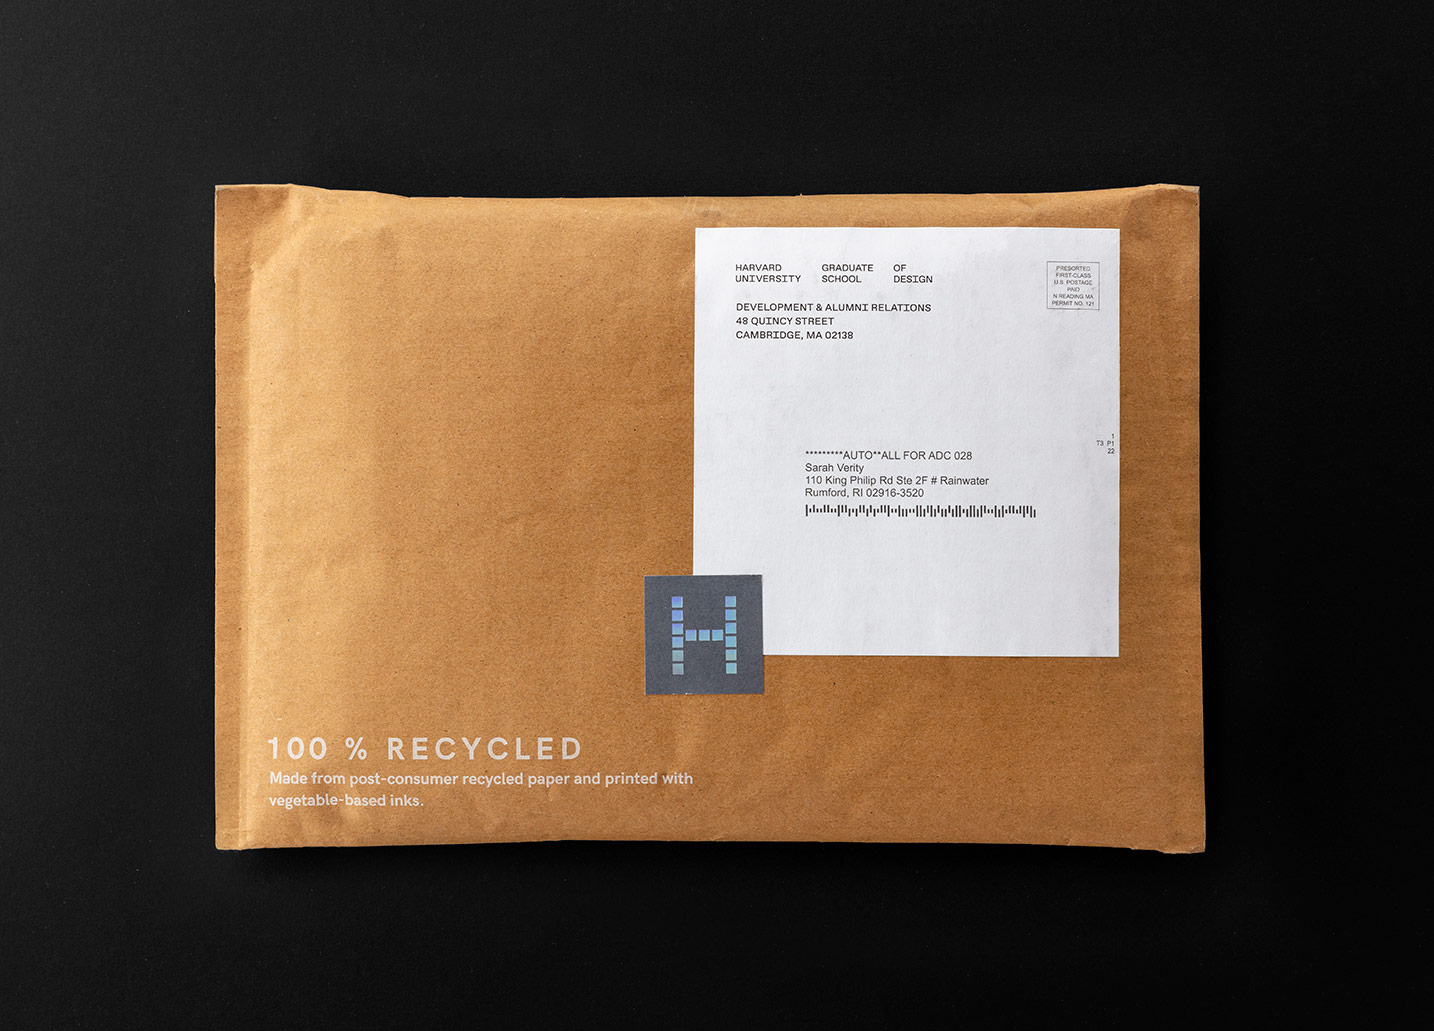 Outside of a mailing envelope that says 100% Recycled Made from post-consumer recycled paper and printed with vegetable-based inks.